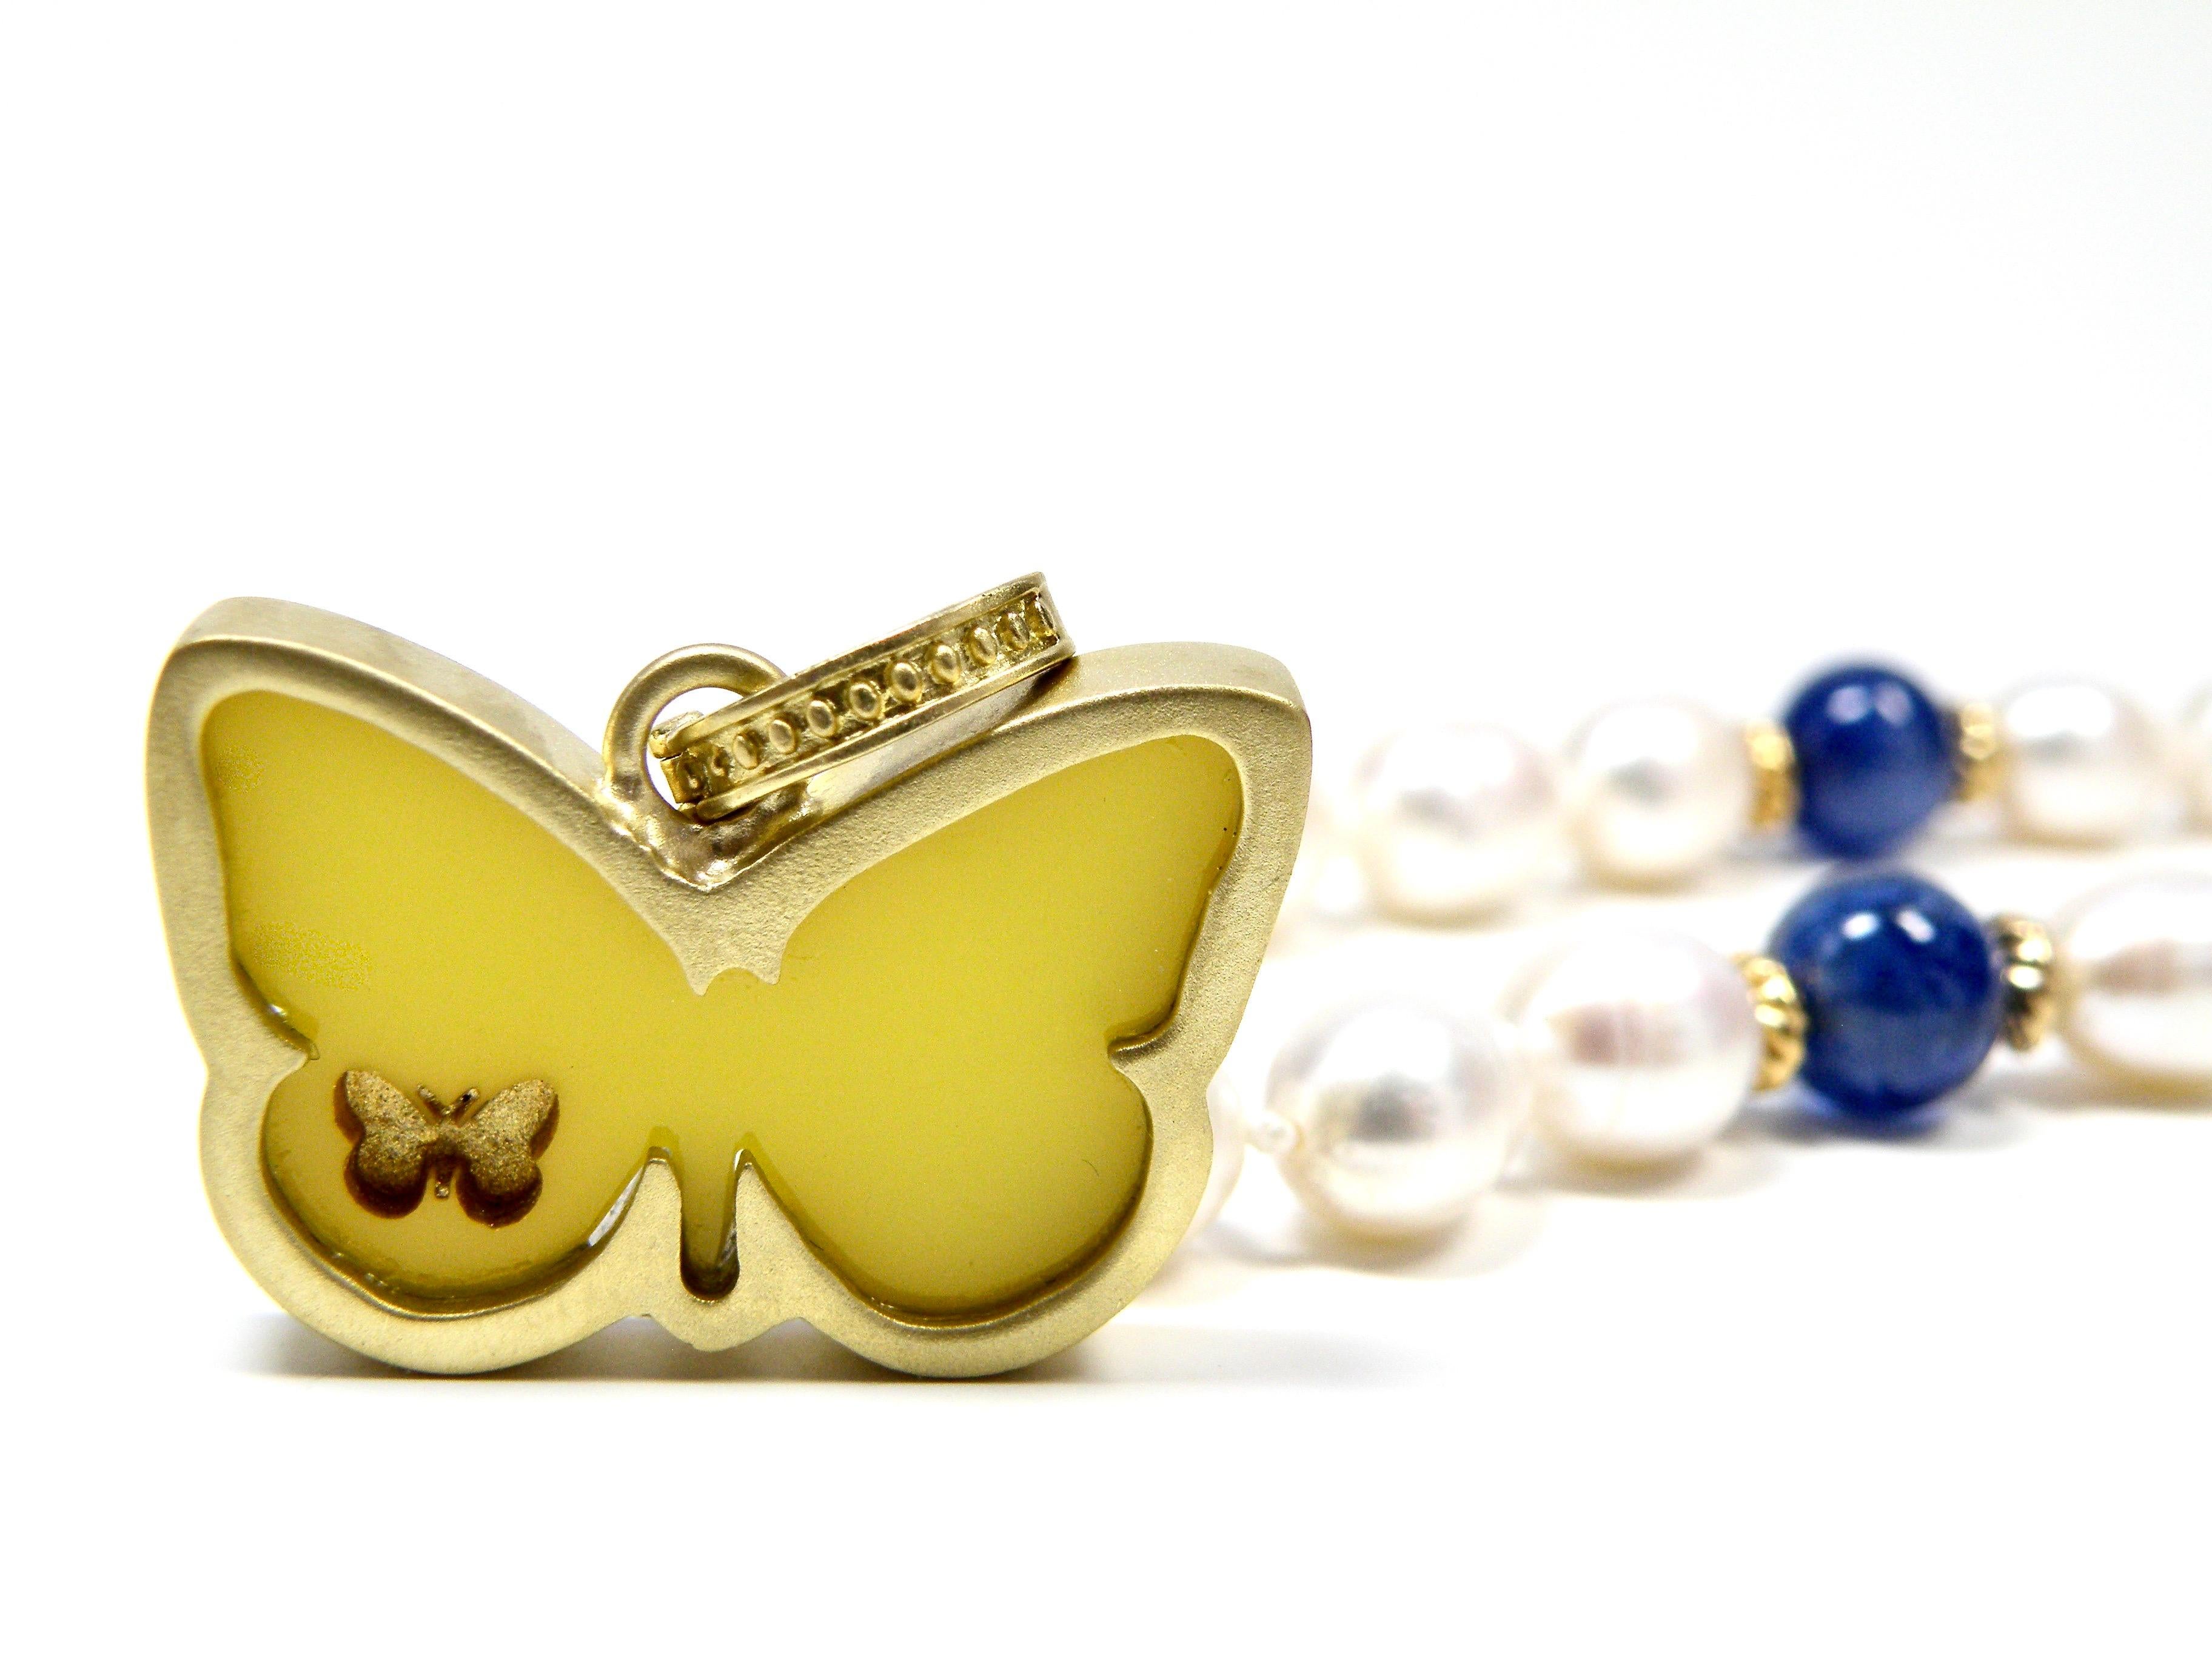 18 karat bezelled butterfly hand carved in yellow agate.